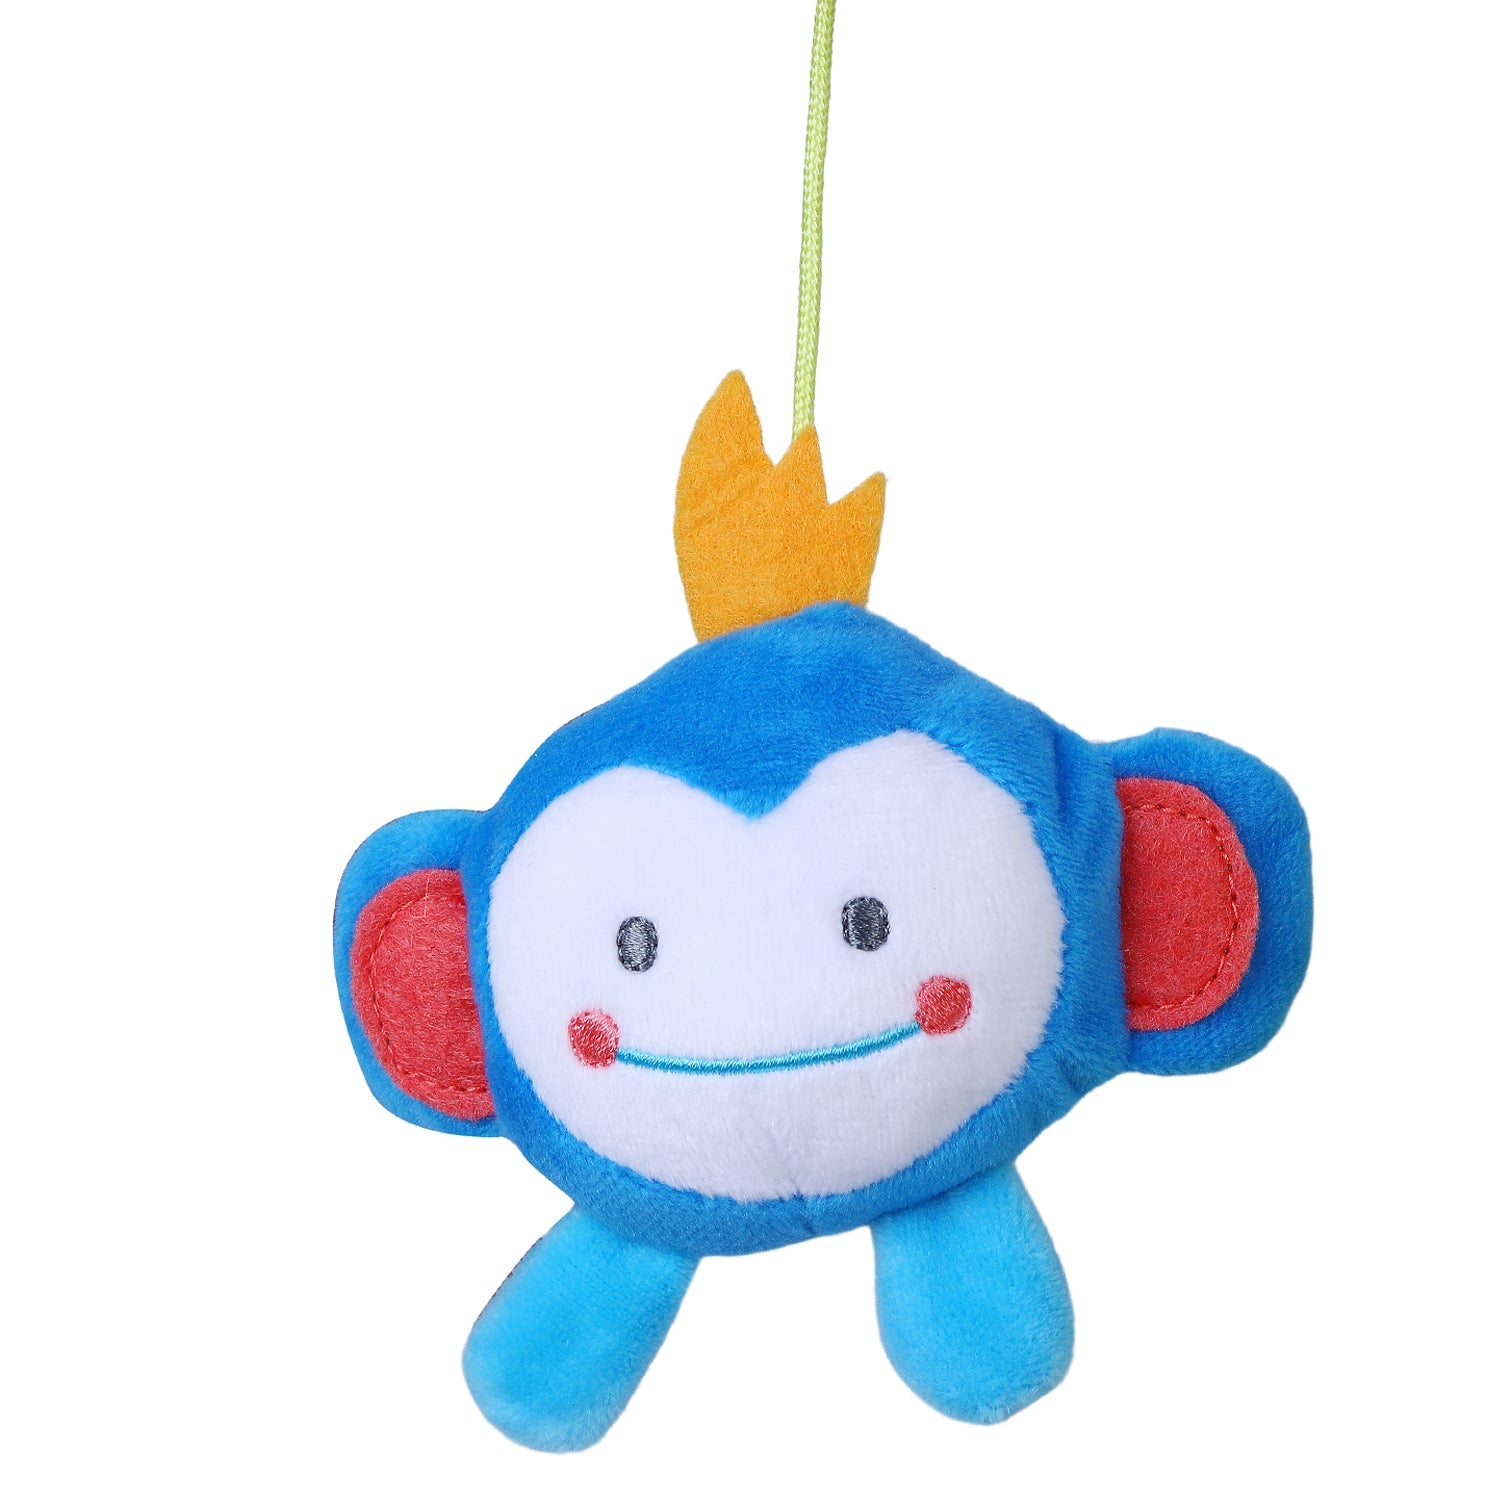 Bird In The Sky Bed Hanging Rattle Toy Rotating Cot Mobile - Blue